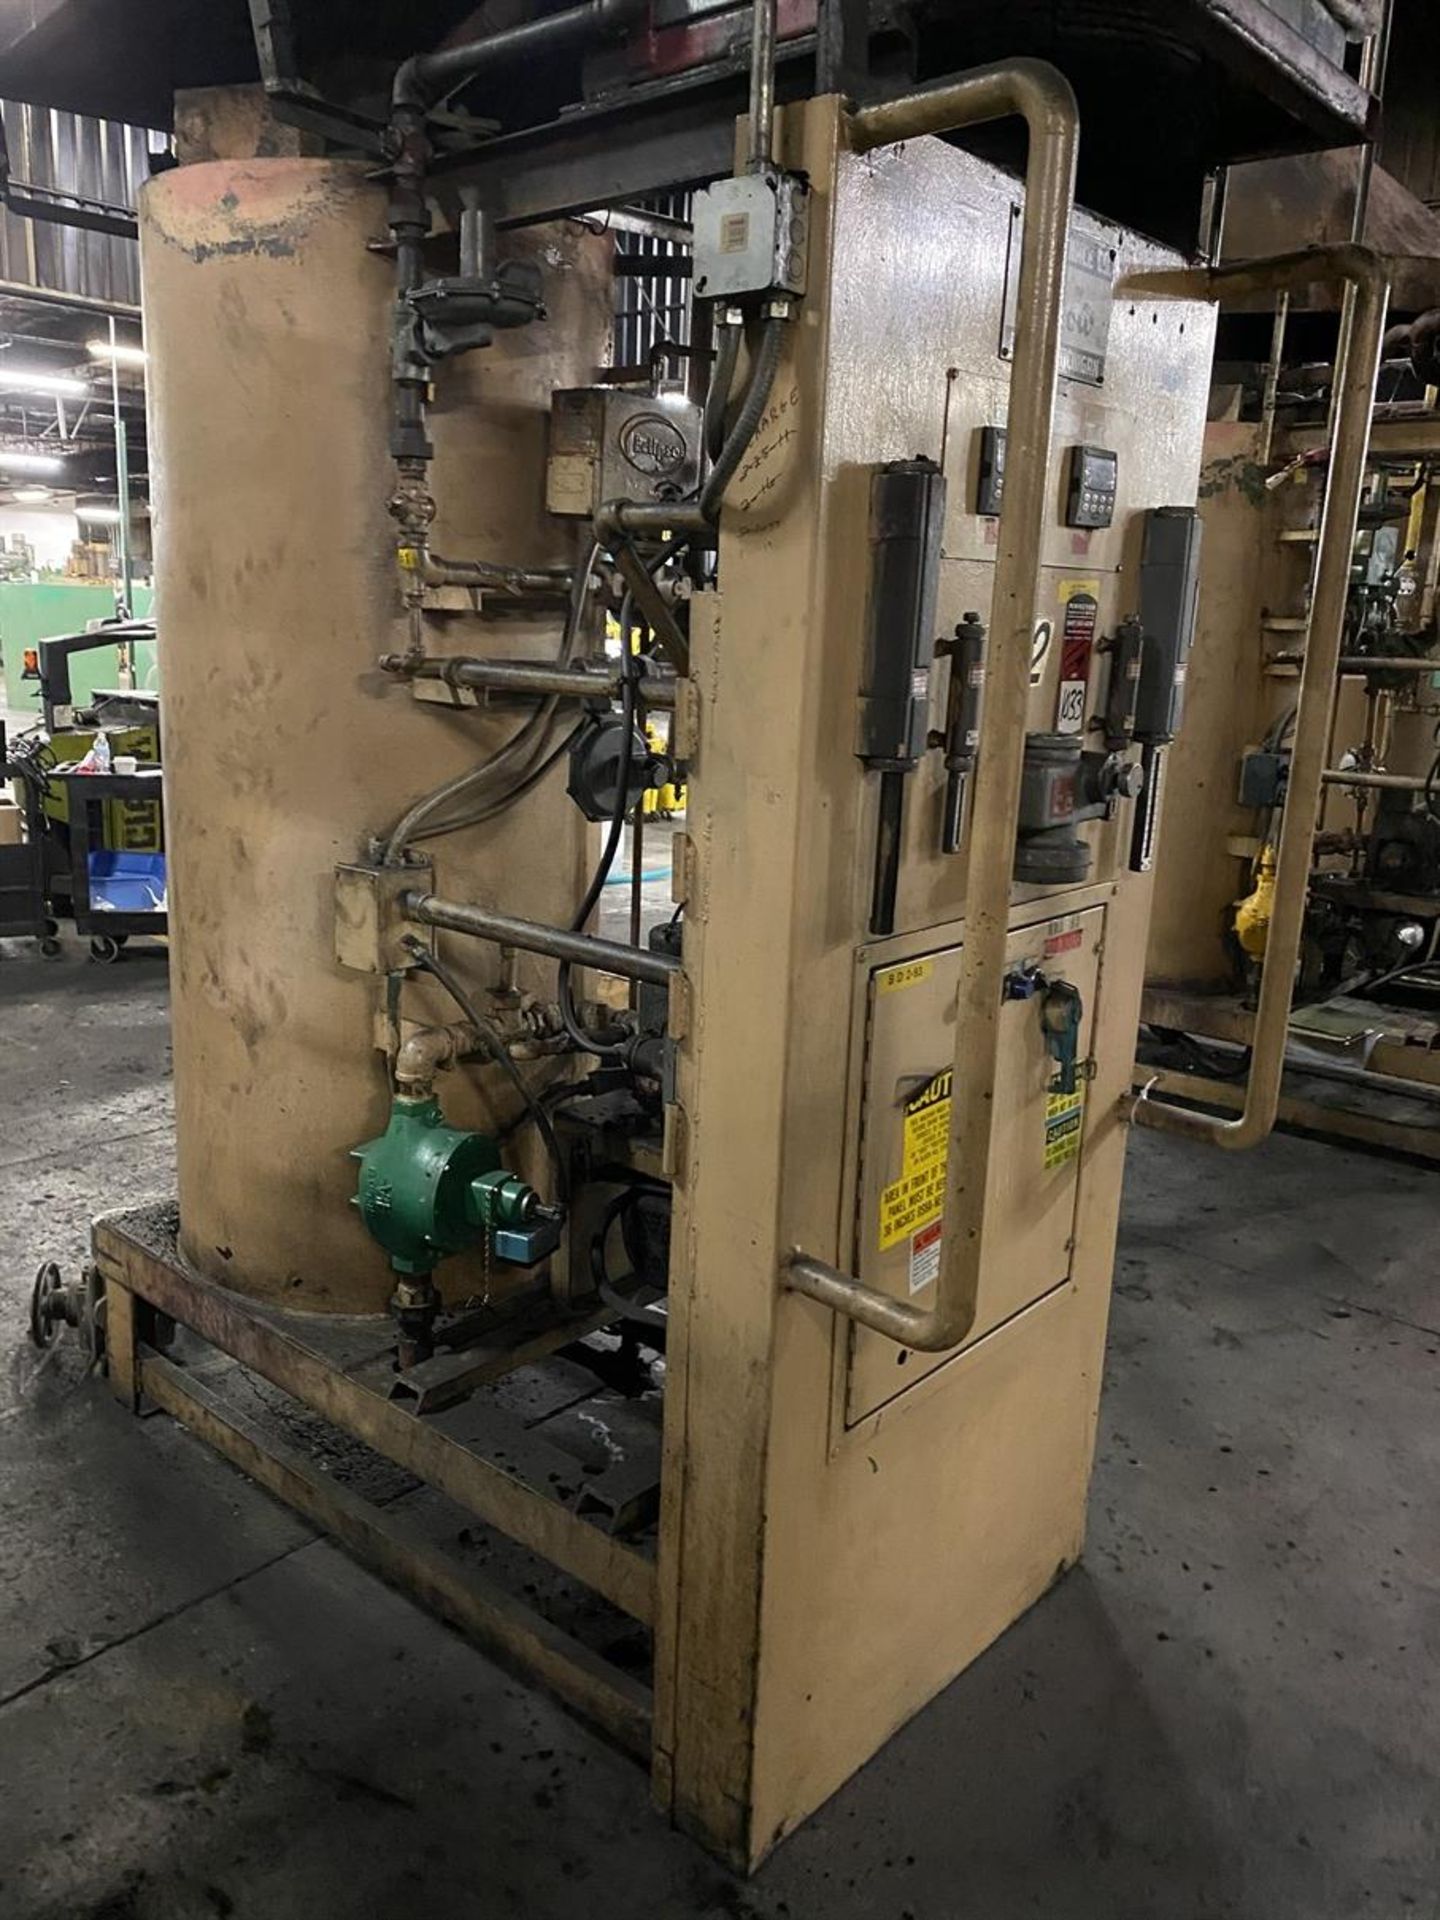 DOW FURNACE 20-22-EQ-2 Endothermic Generator, s/n 2565 - This lot has been removed from the auction - Image 2 of 2